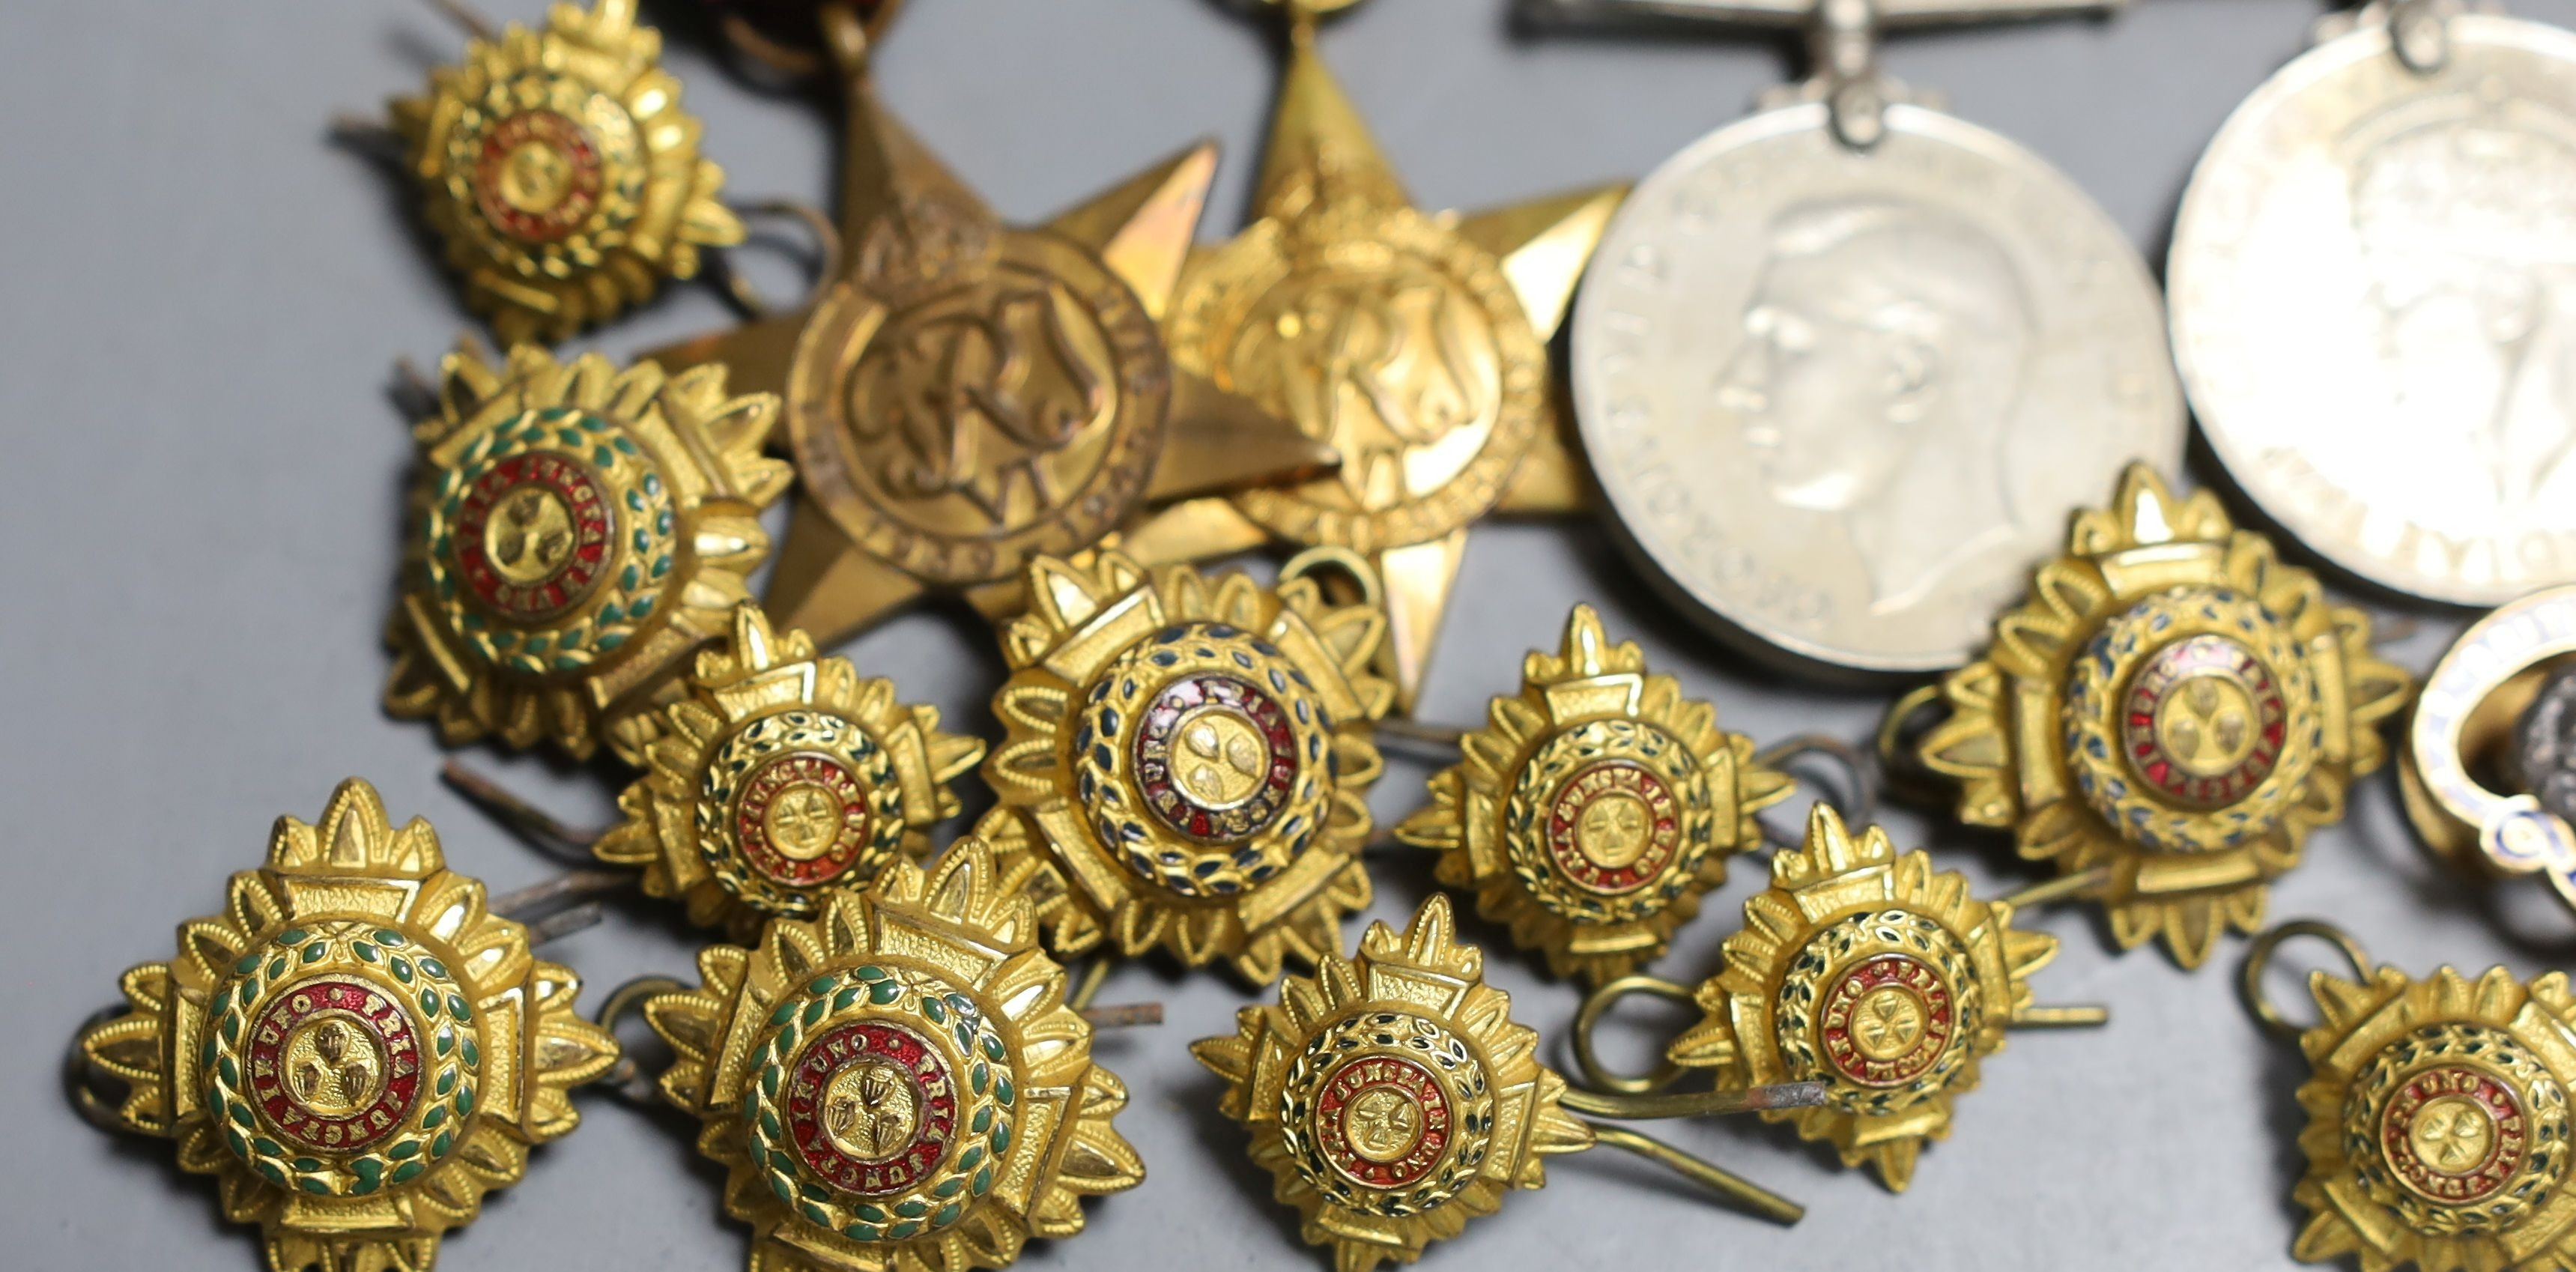 A group of five WW2 medals, together with a selection of cap badges and a pocket watch